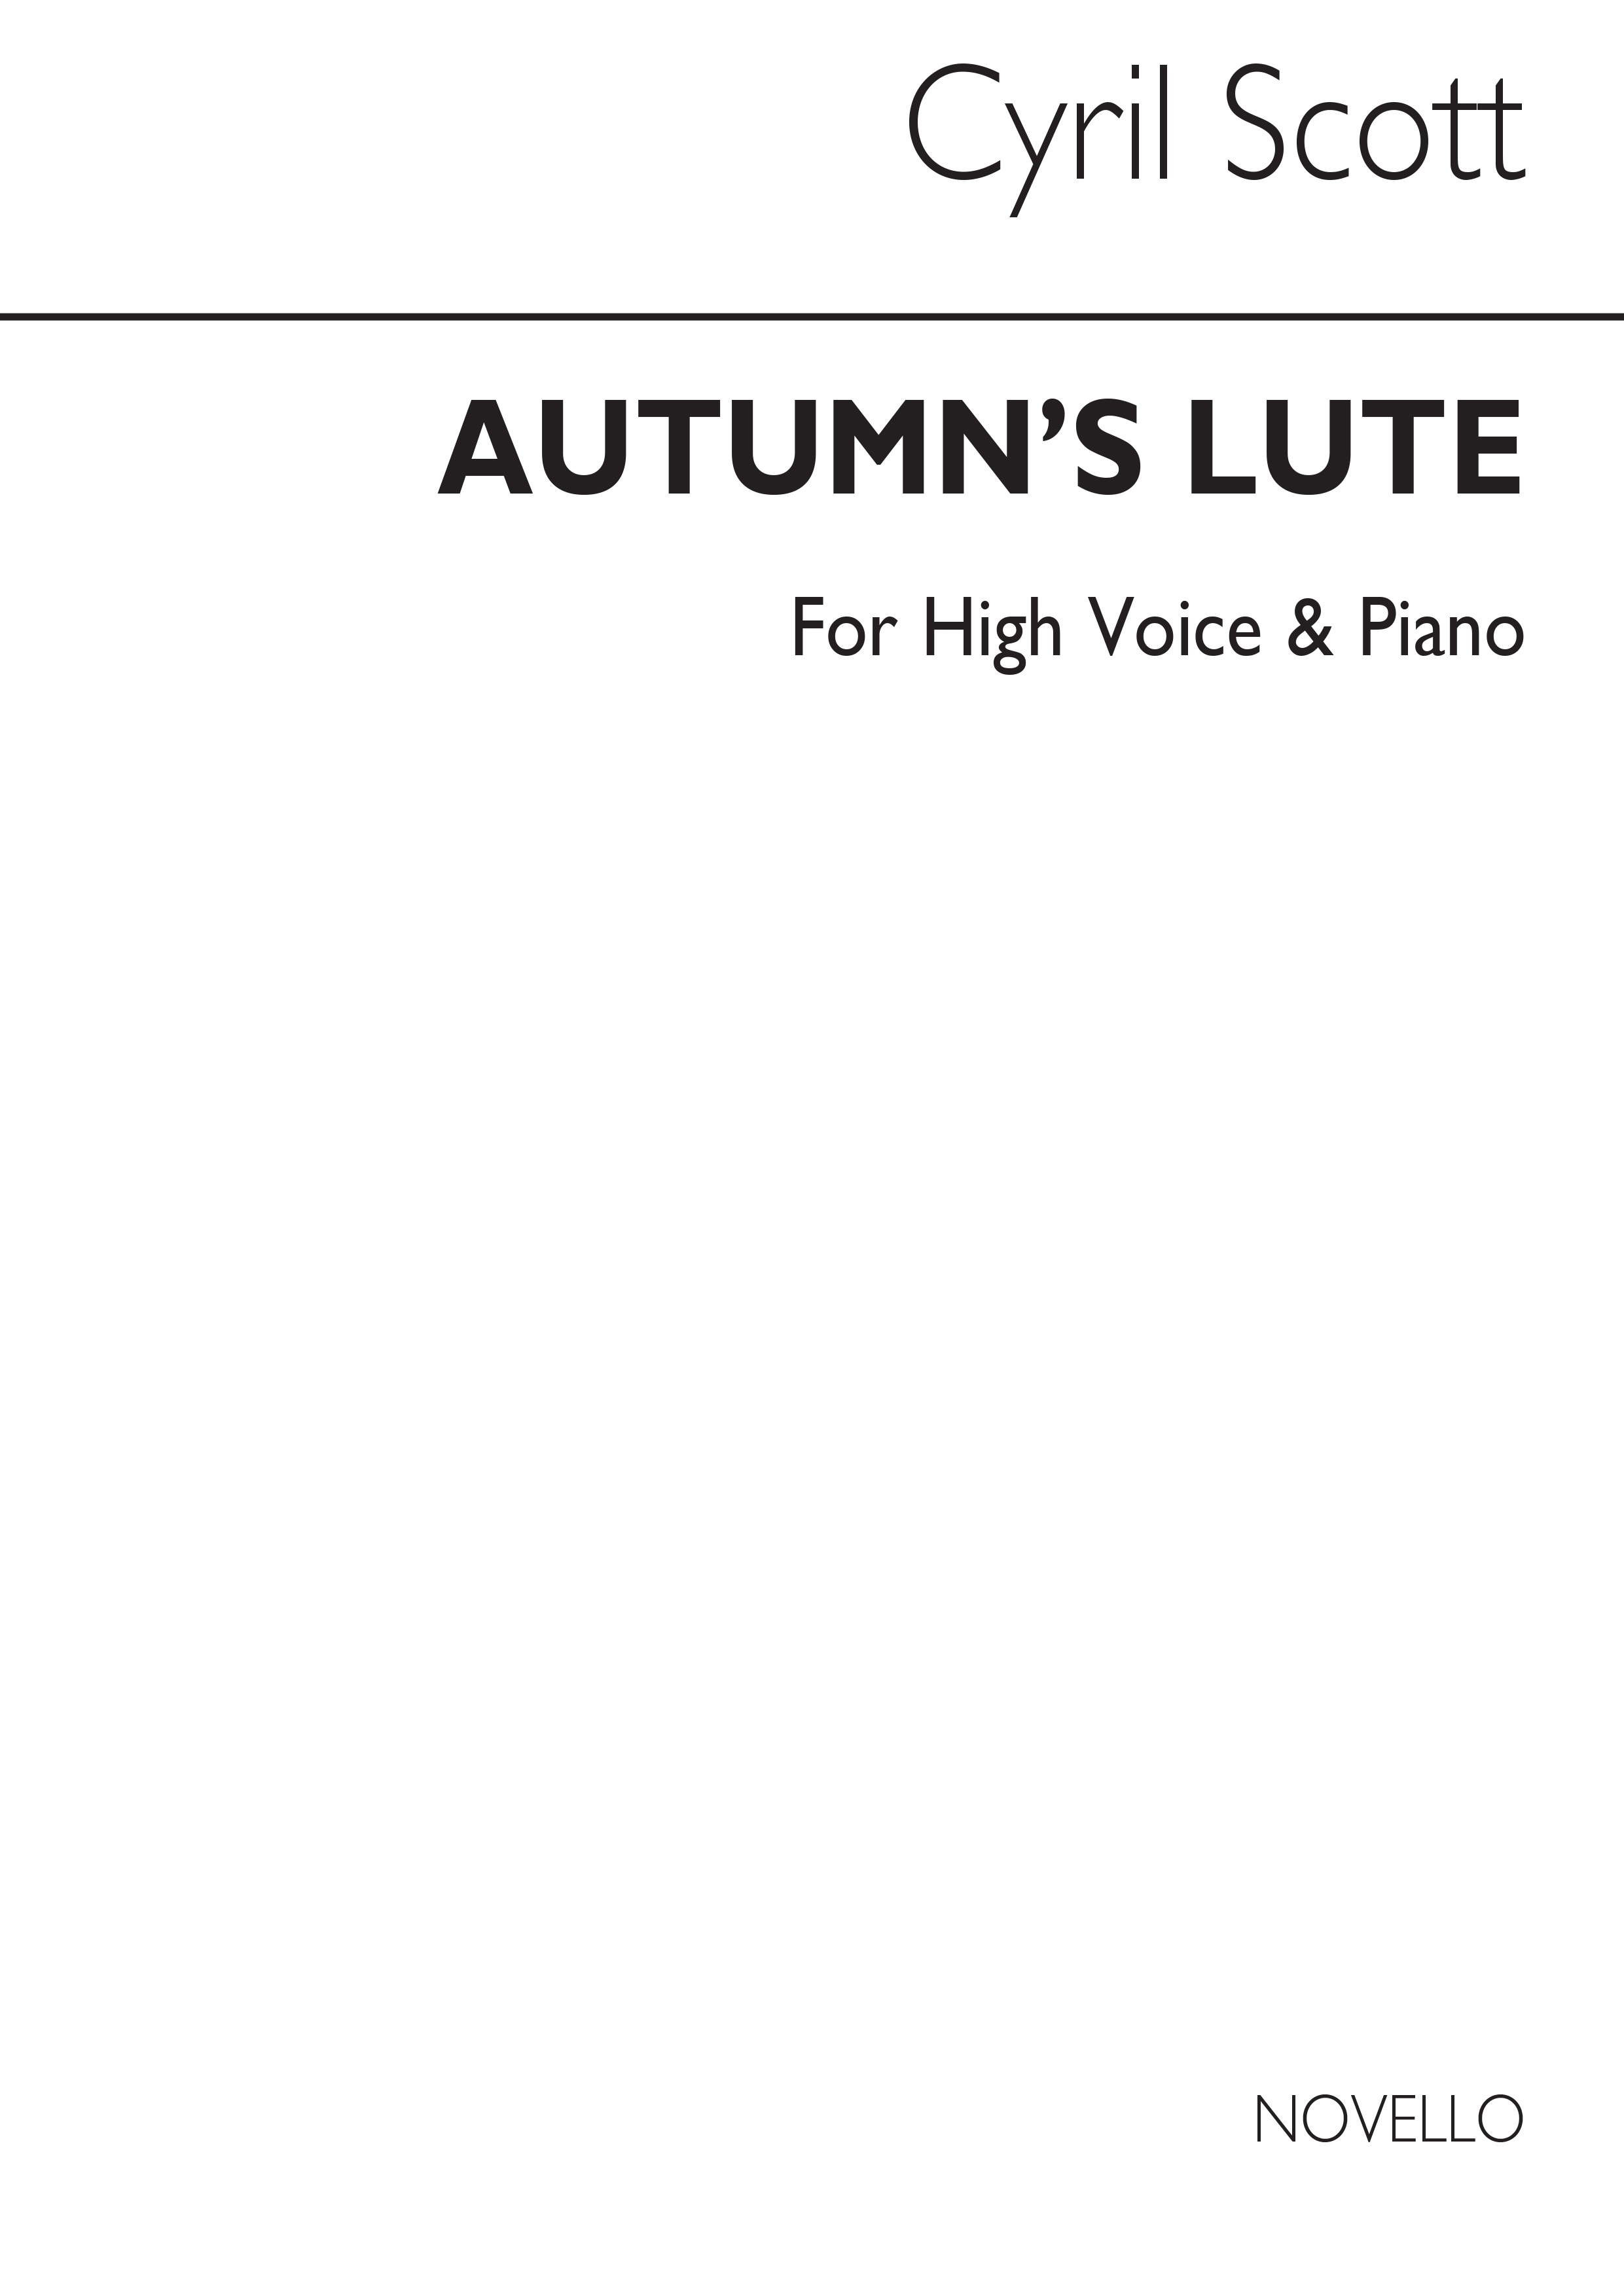 Cyril Scott: Autumn's Lute-high Voice/Piano: High Voice: Vocal Work